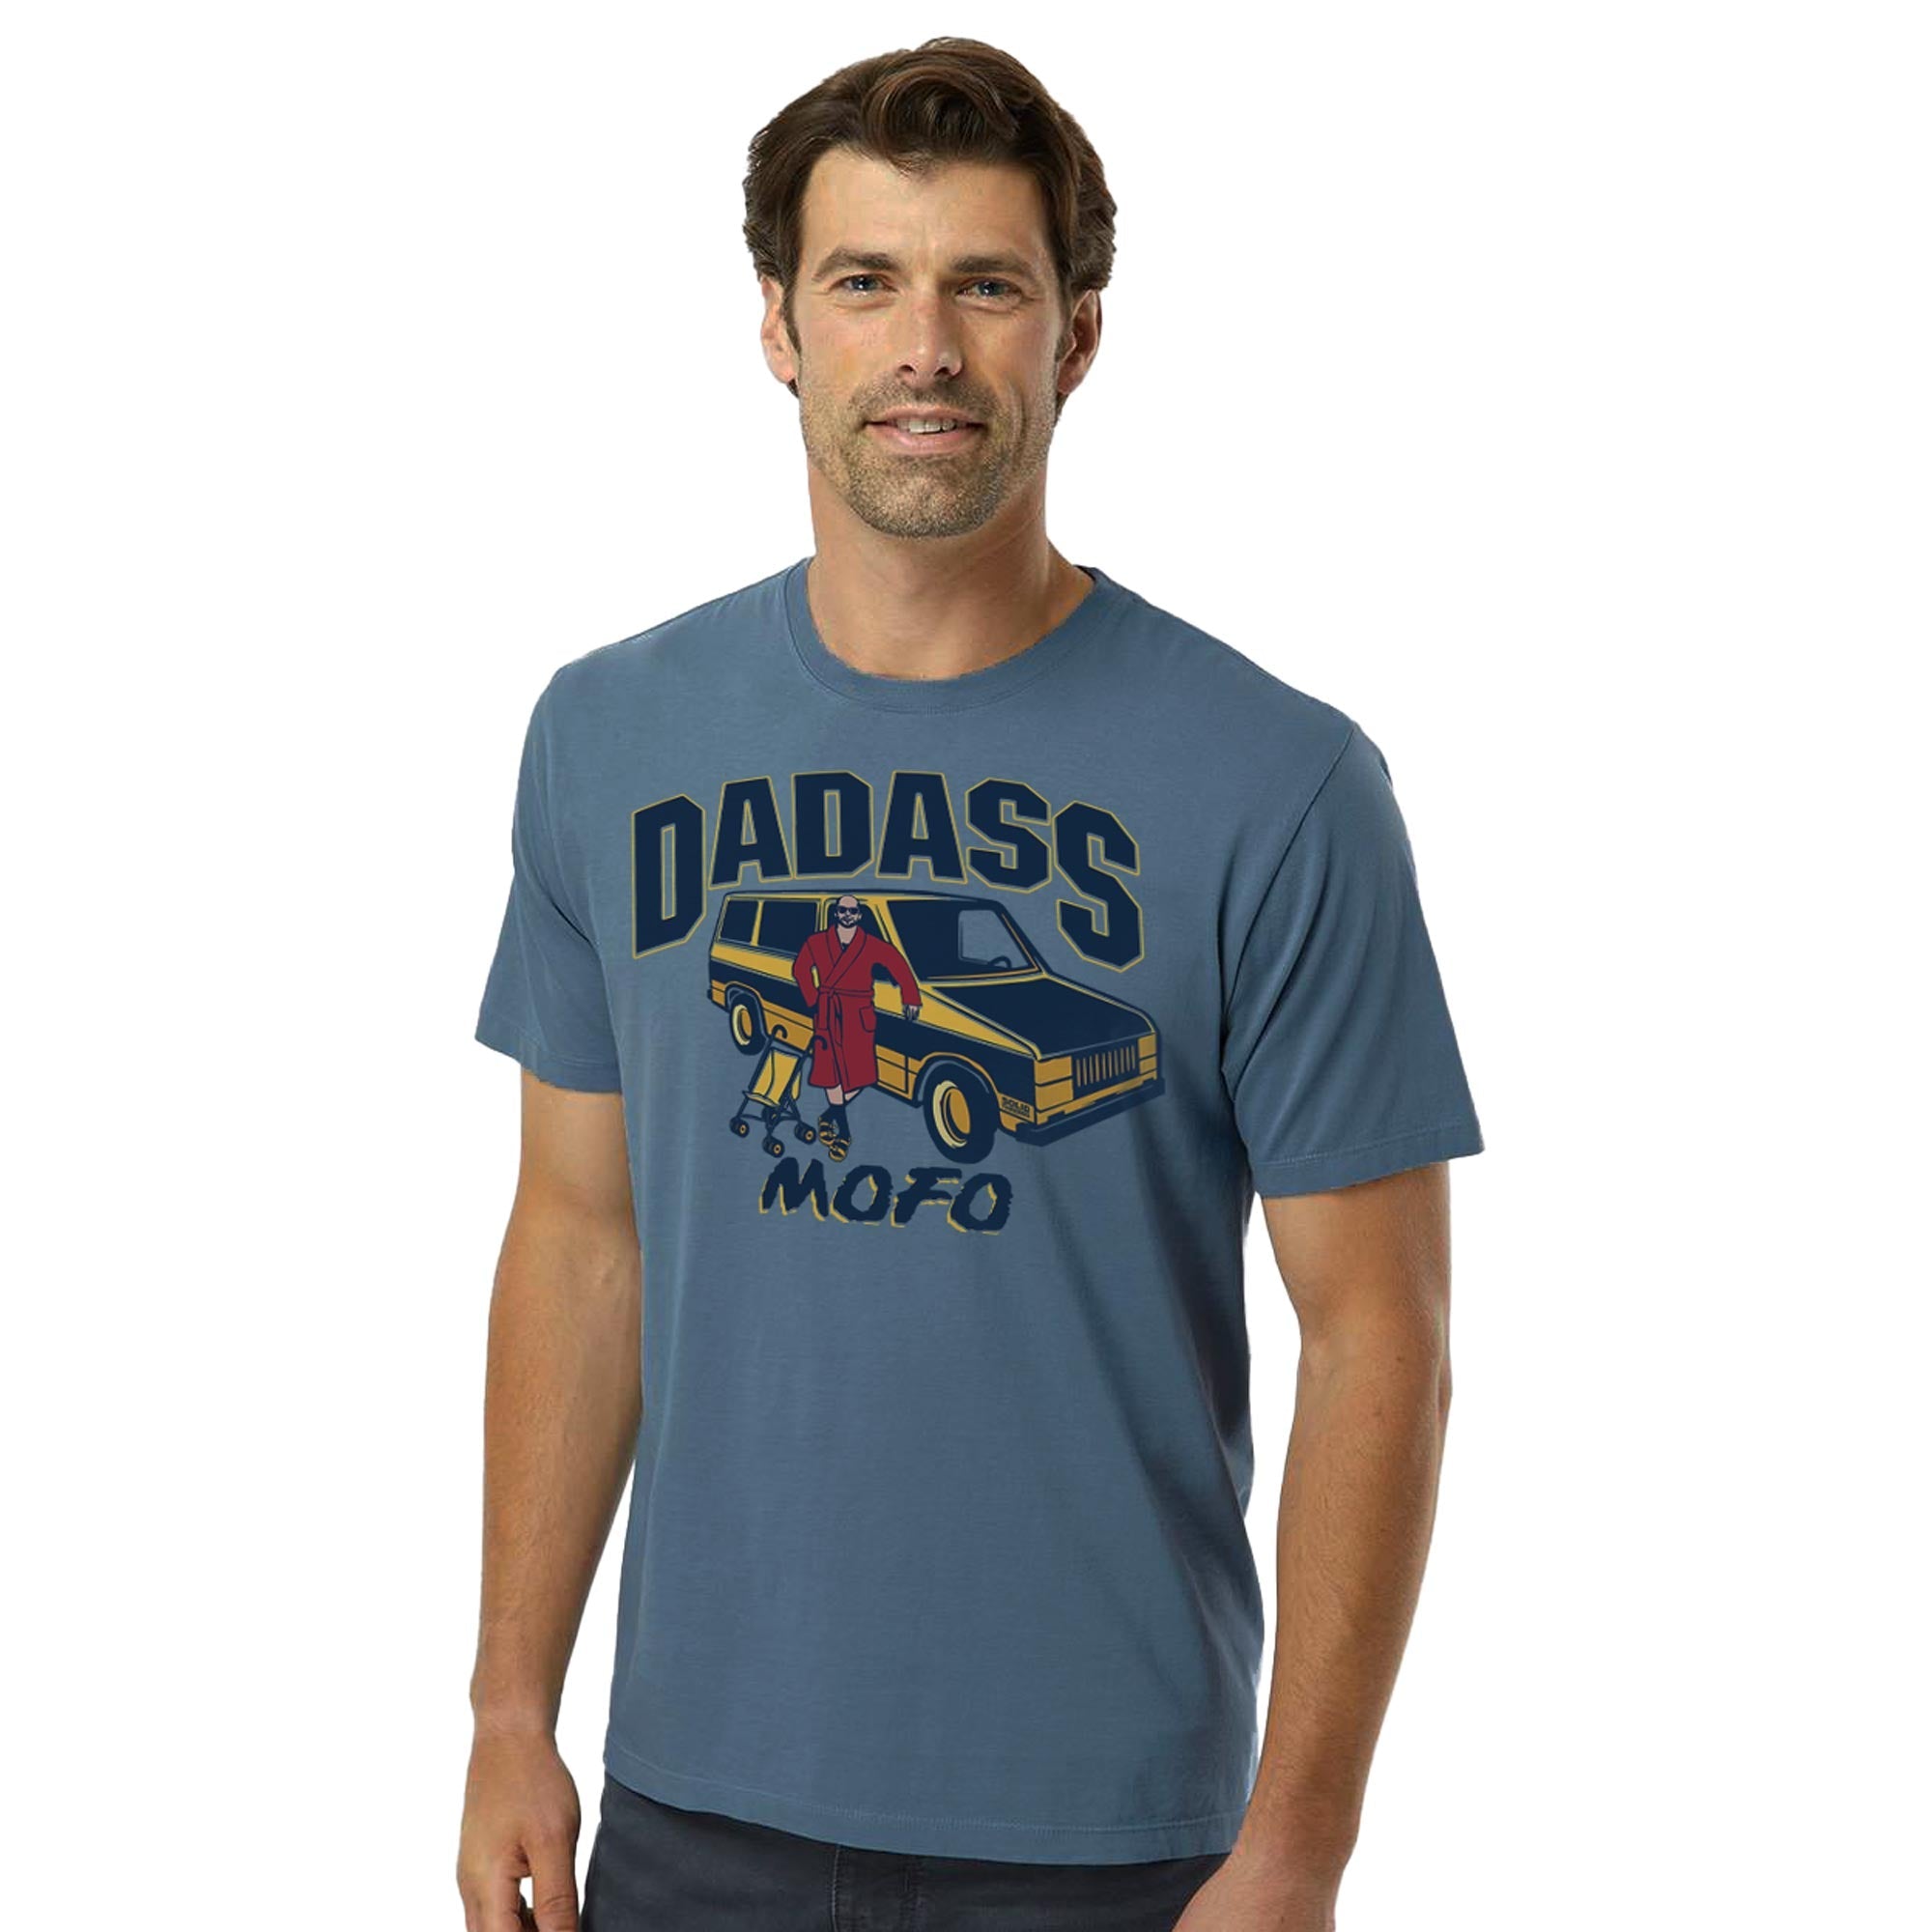 Dadass Vintage Organic Cotton T-shirt | Funny Parenting   Tee On Model | Solid Threads